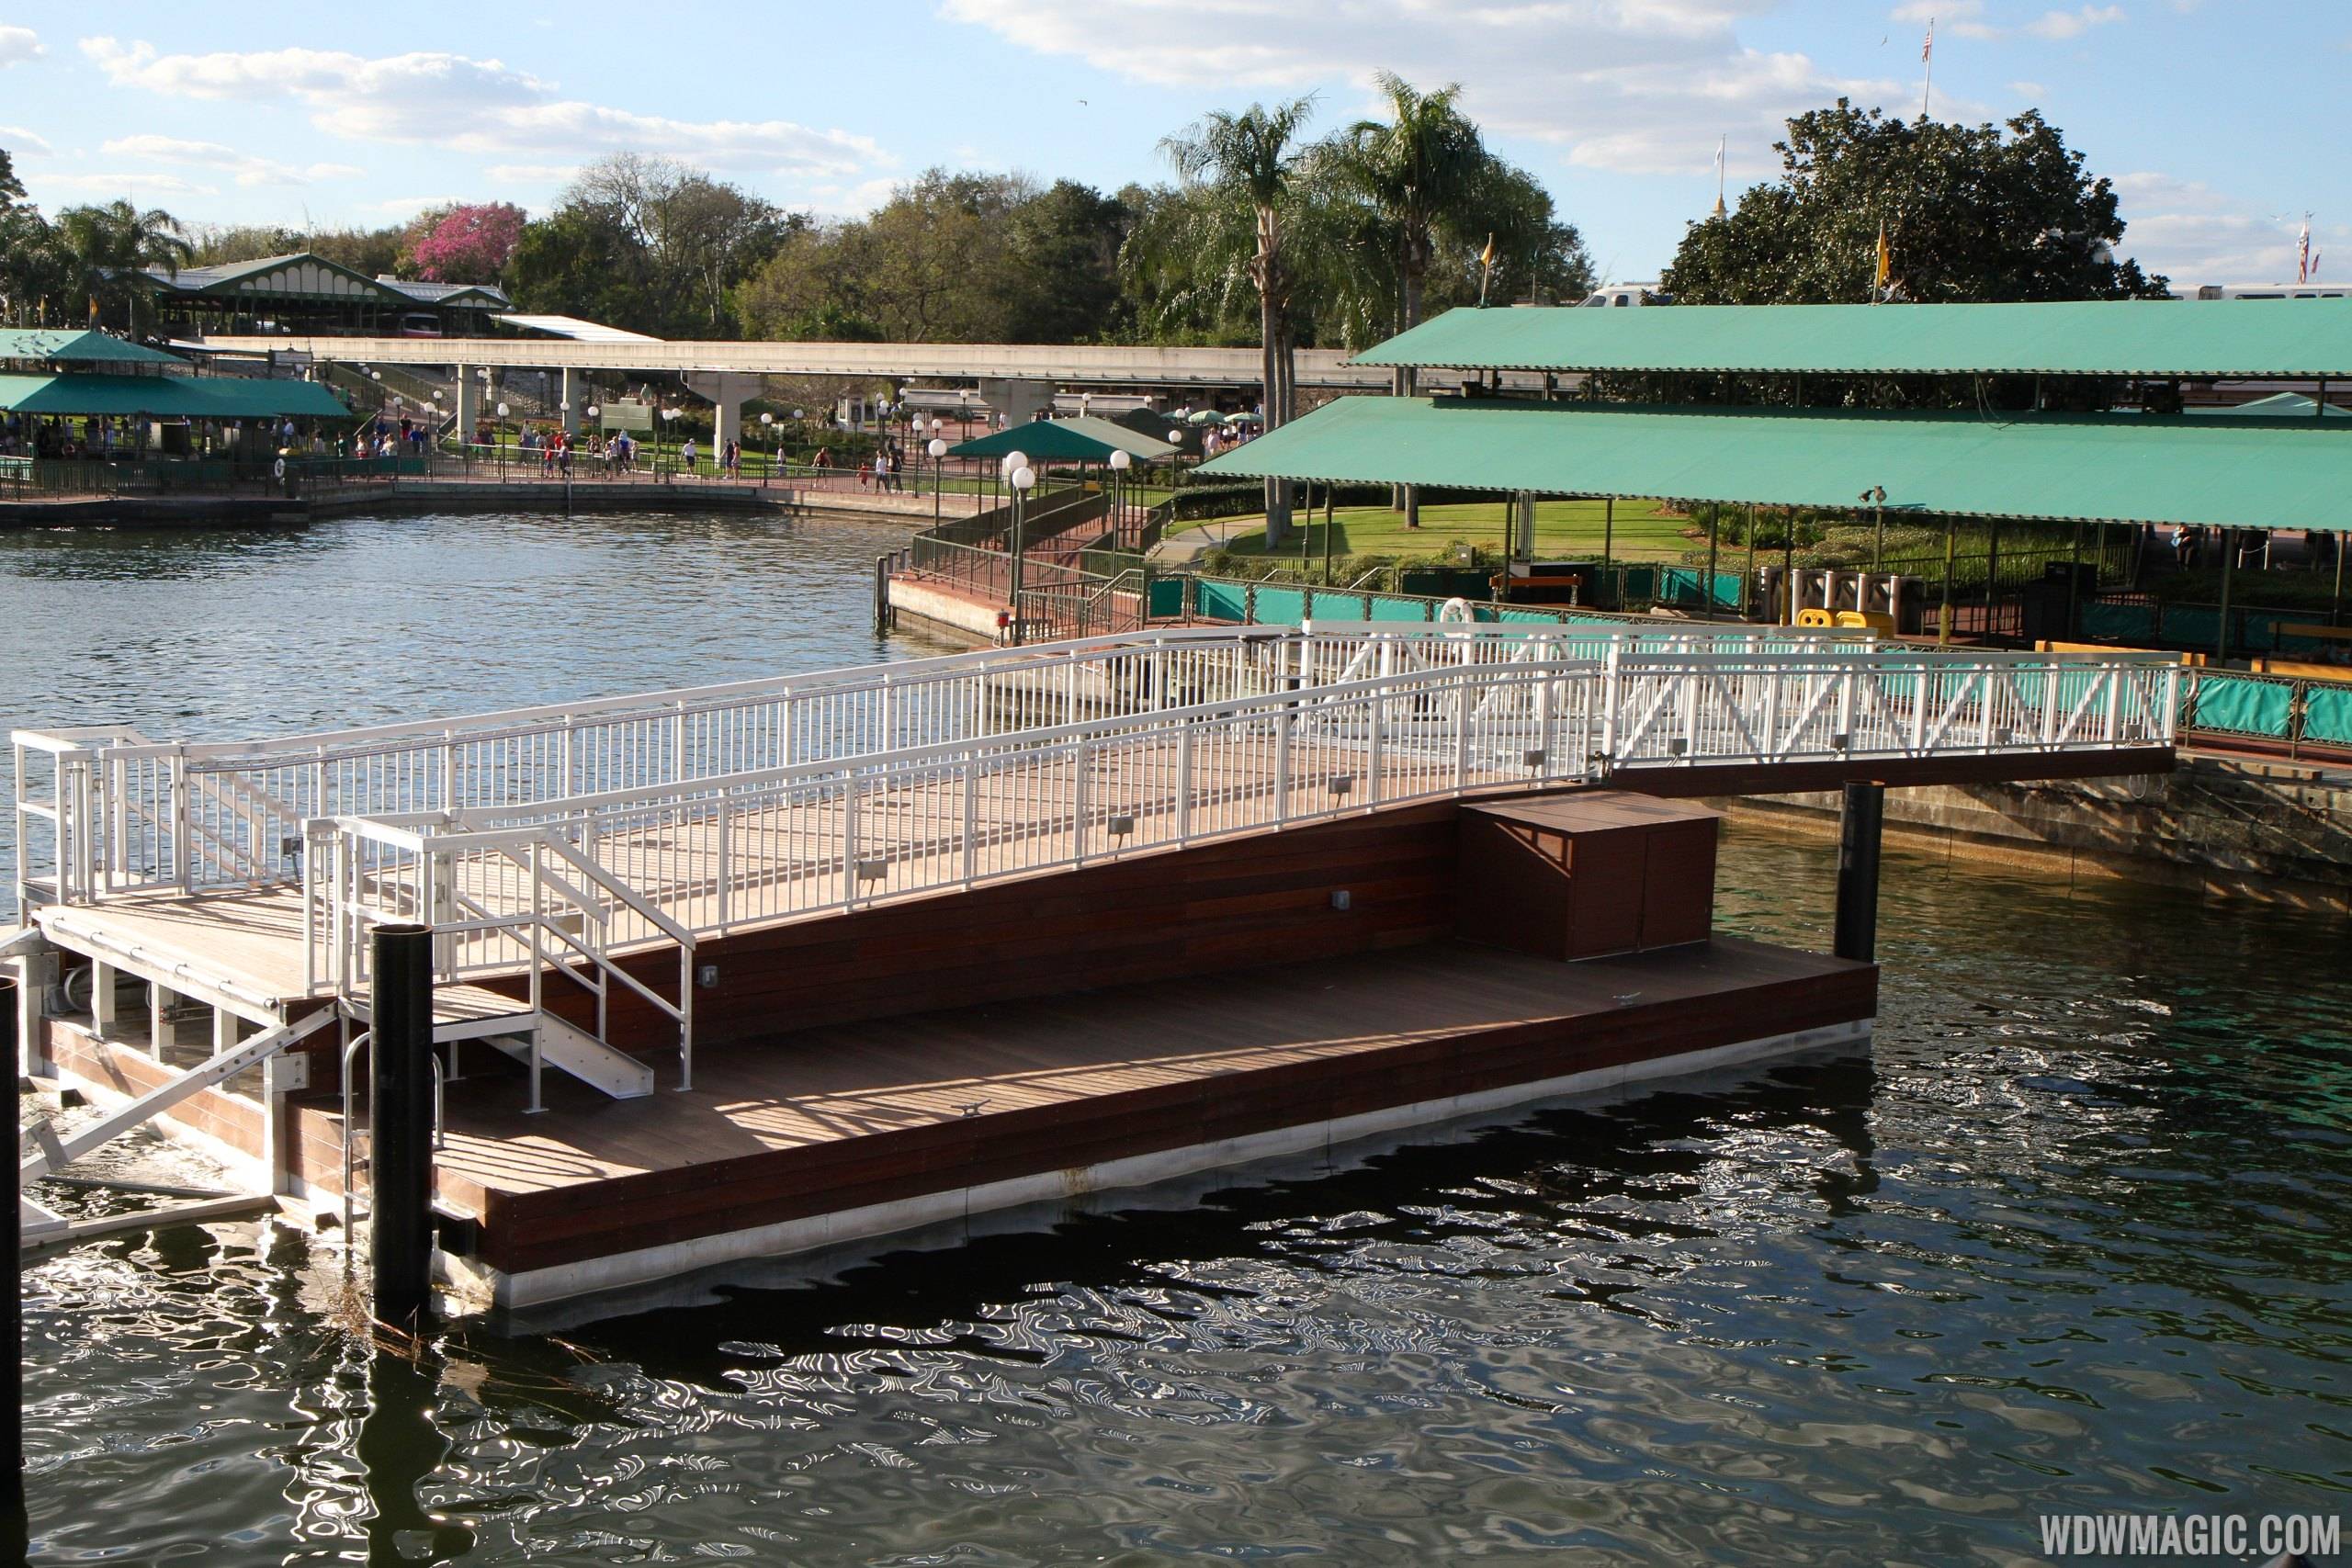 Second ferry boat dock at the Magic Kingdom